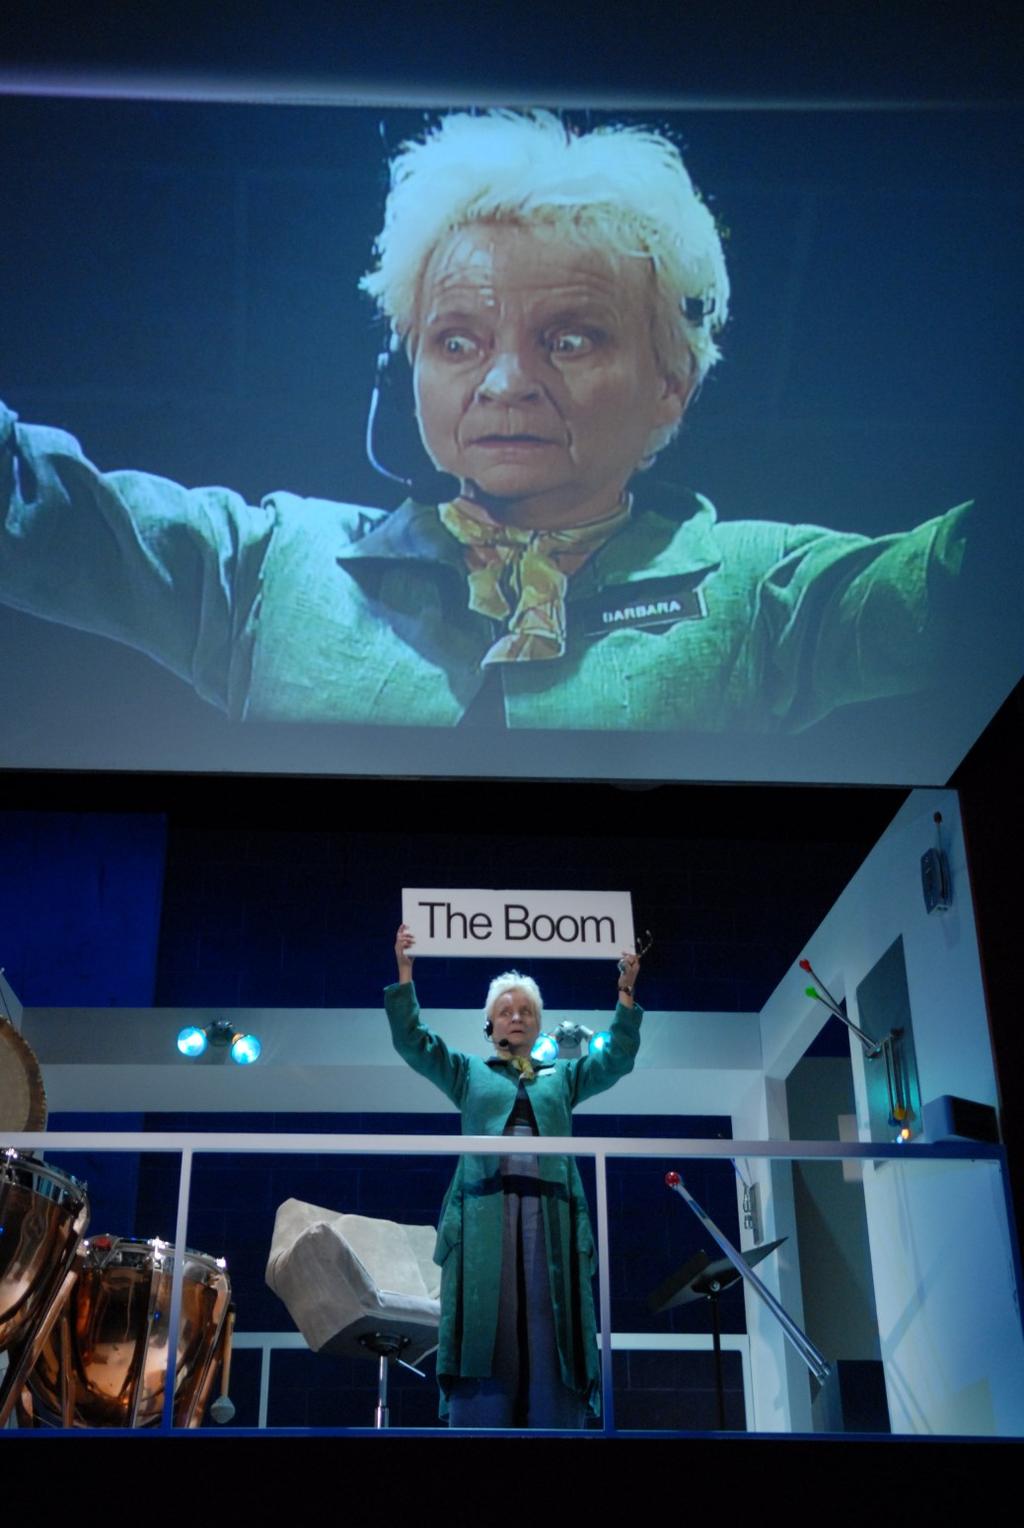 During the Boom: Barbara is remembers that she is not supposed to talk to the audience, and holds up the required sign